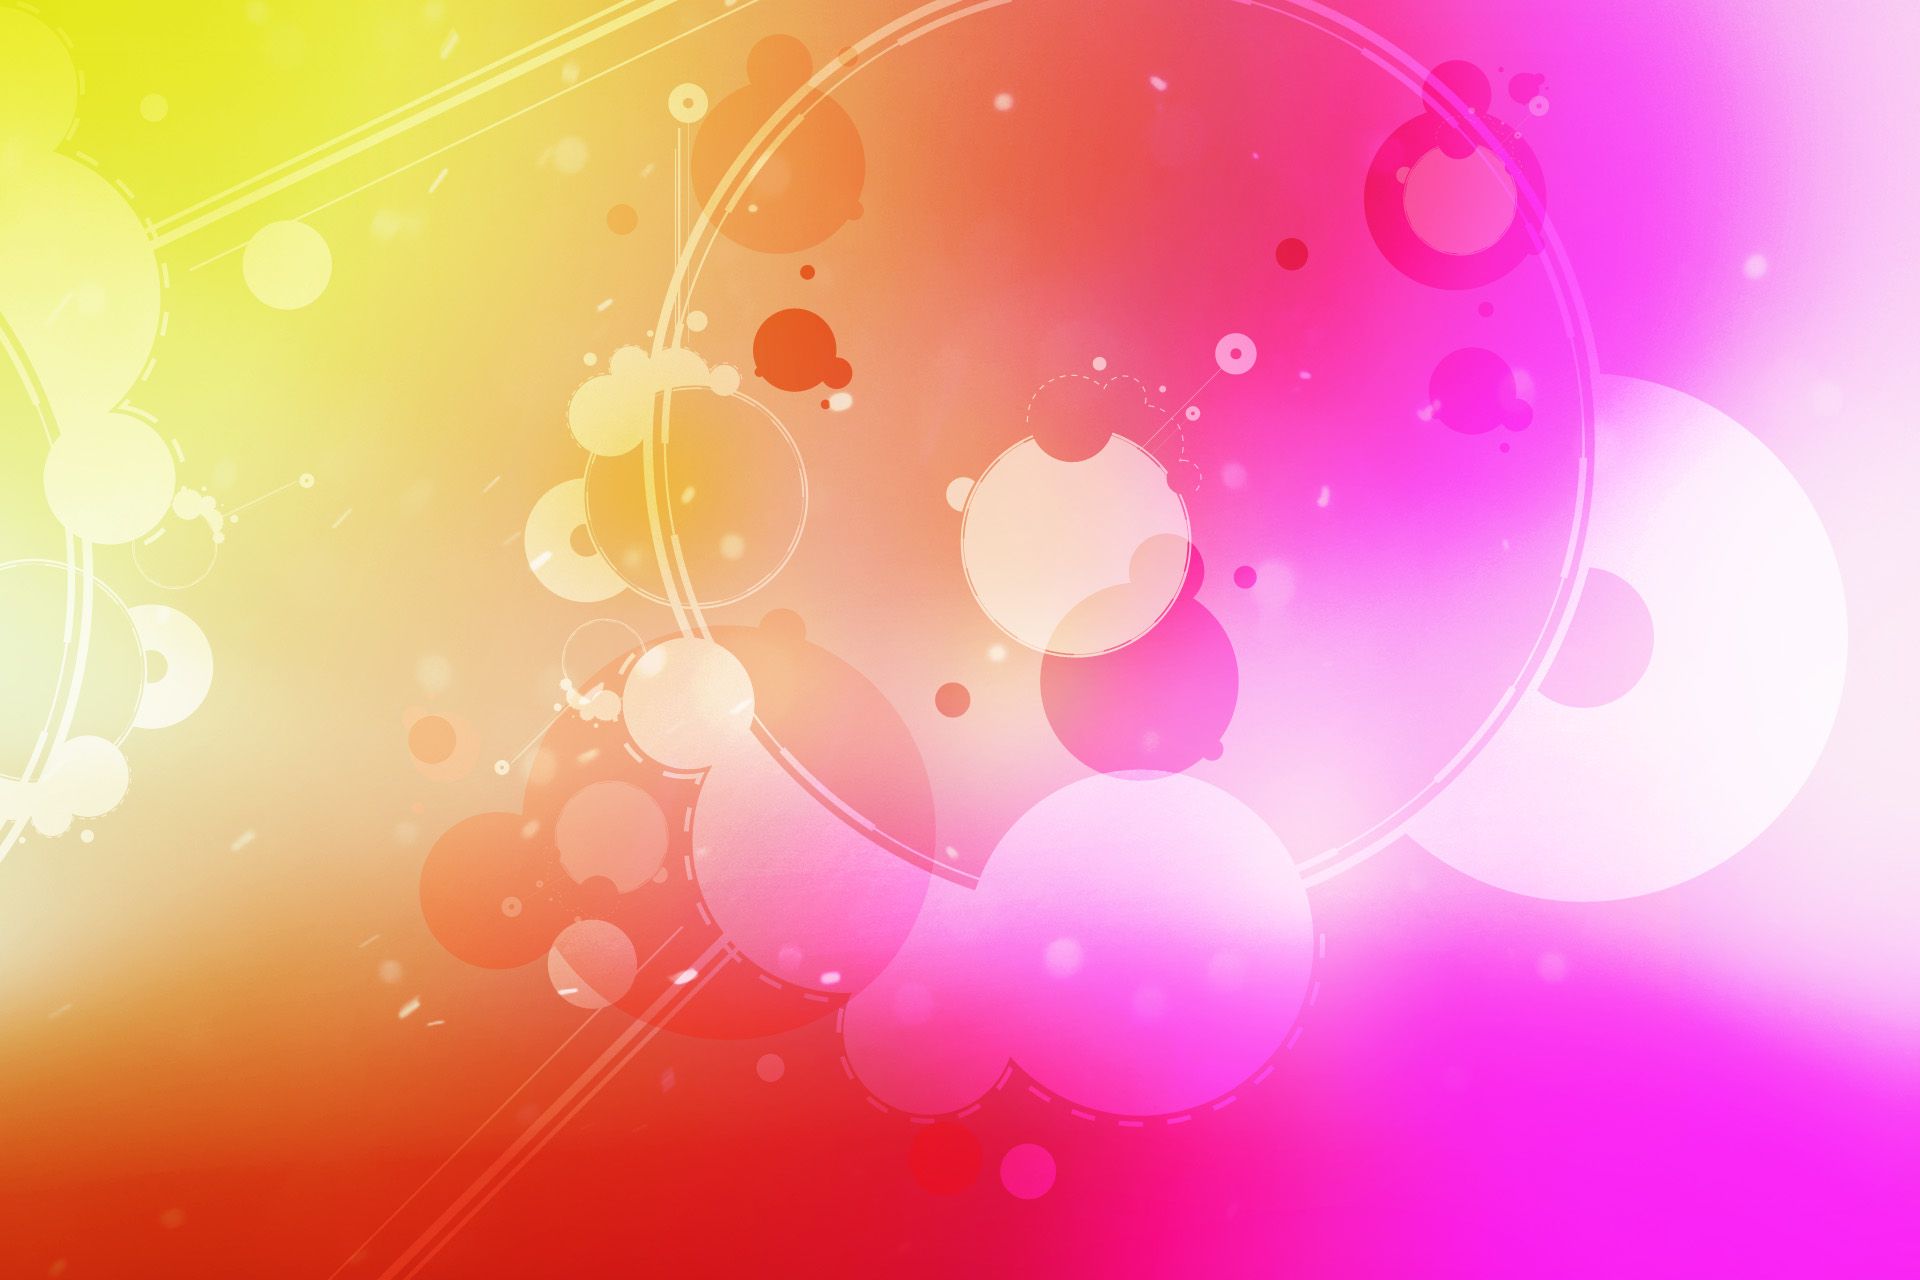 Download New Nexus 7 And Android 4.3 Wallpapers. HD AxeeTech